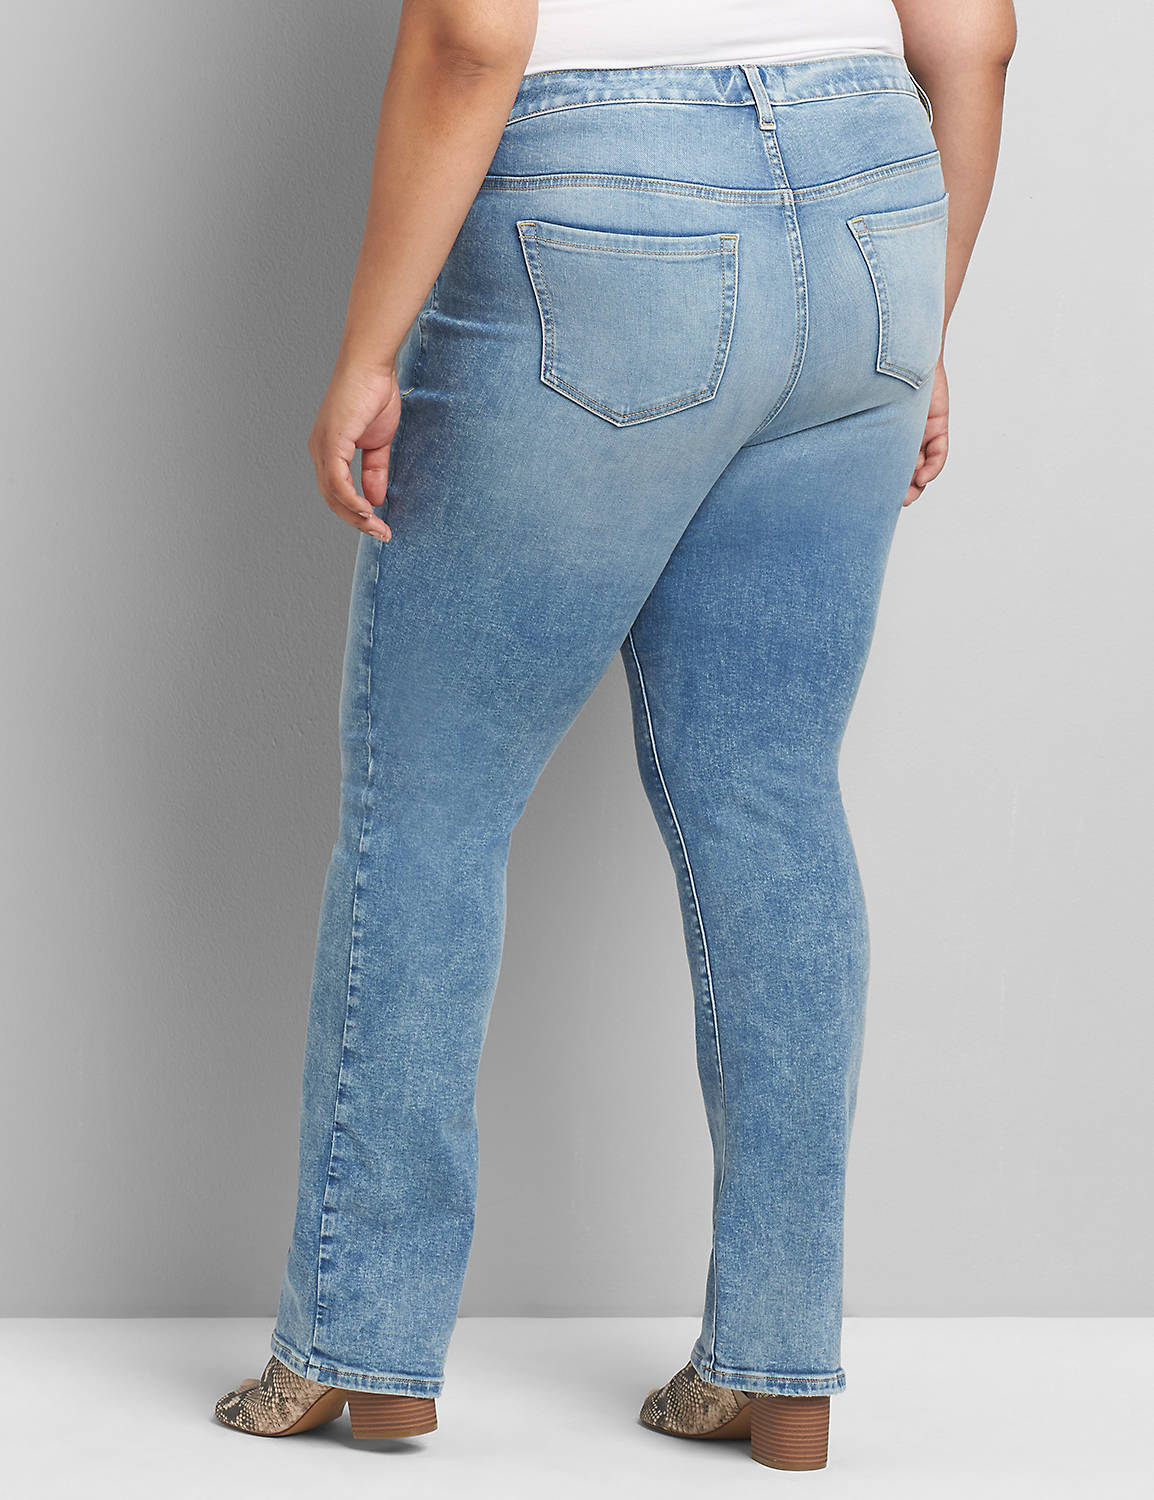 STRAIGHT FIT HIGHER RISE STRAIGHT BRIGHT BLUE WASH 1119508:Light Denim:12 Product Image 2